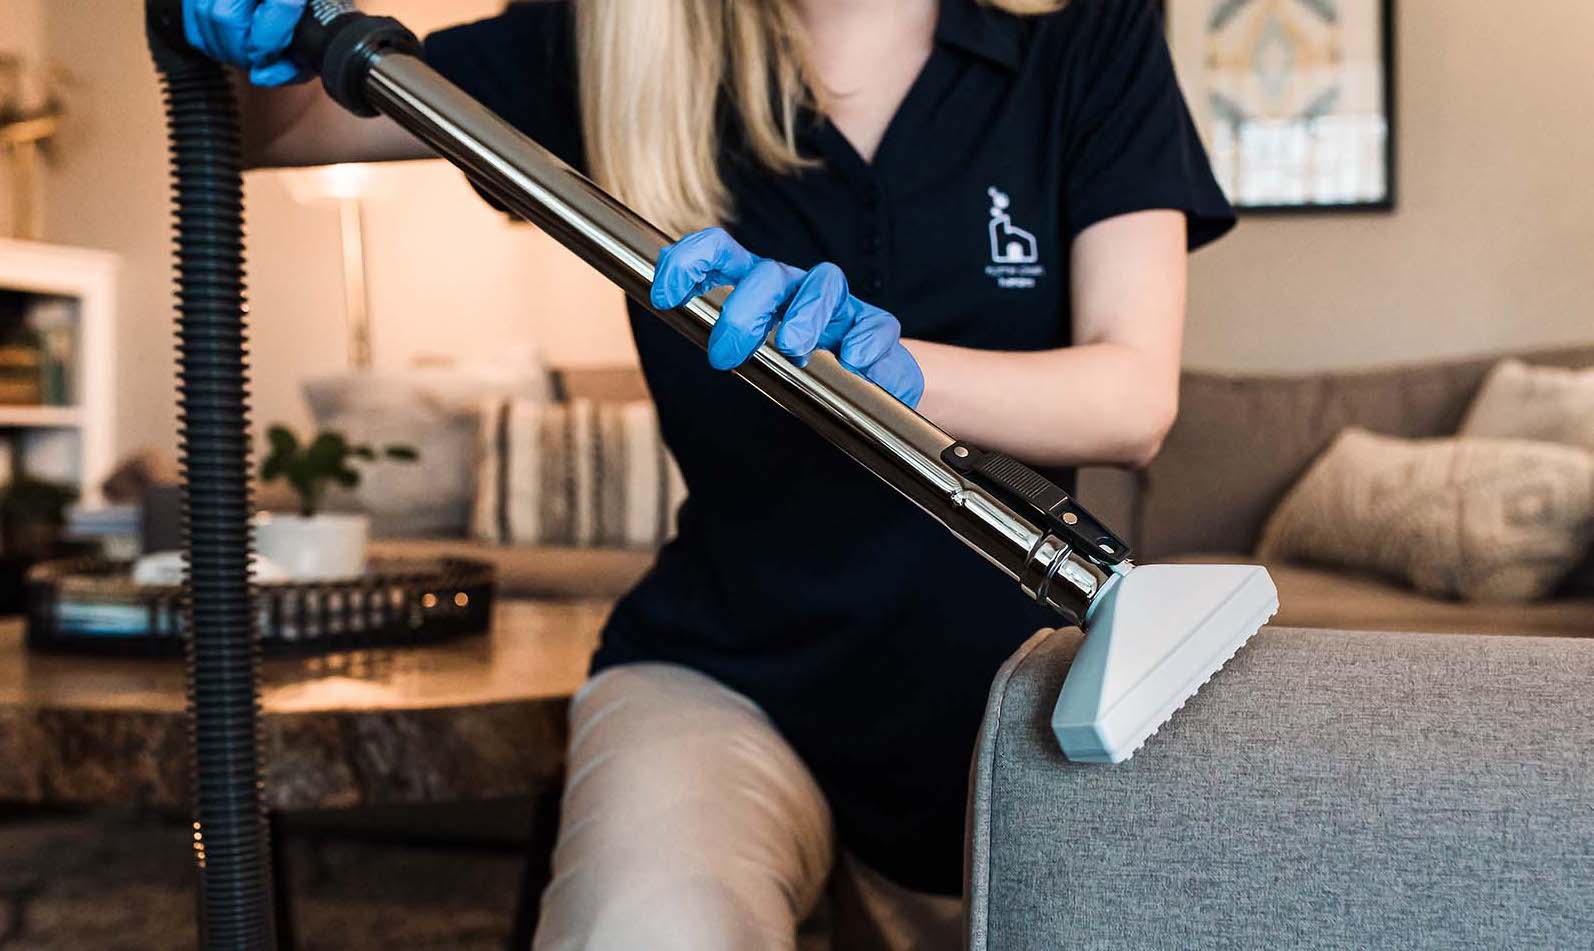 Cleaning technician vacuuming a couch arm